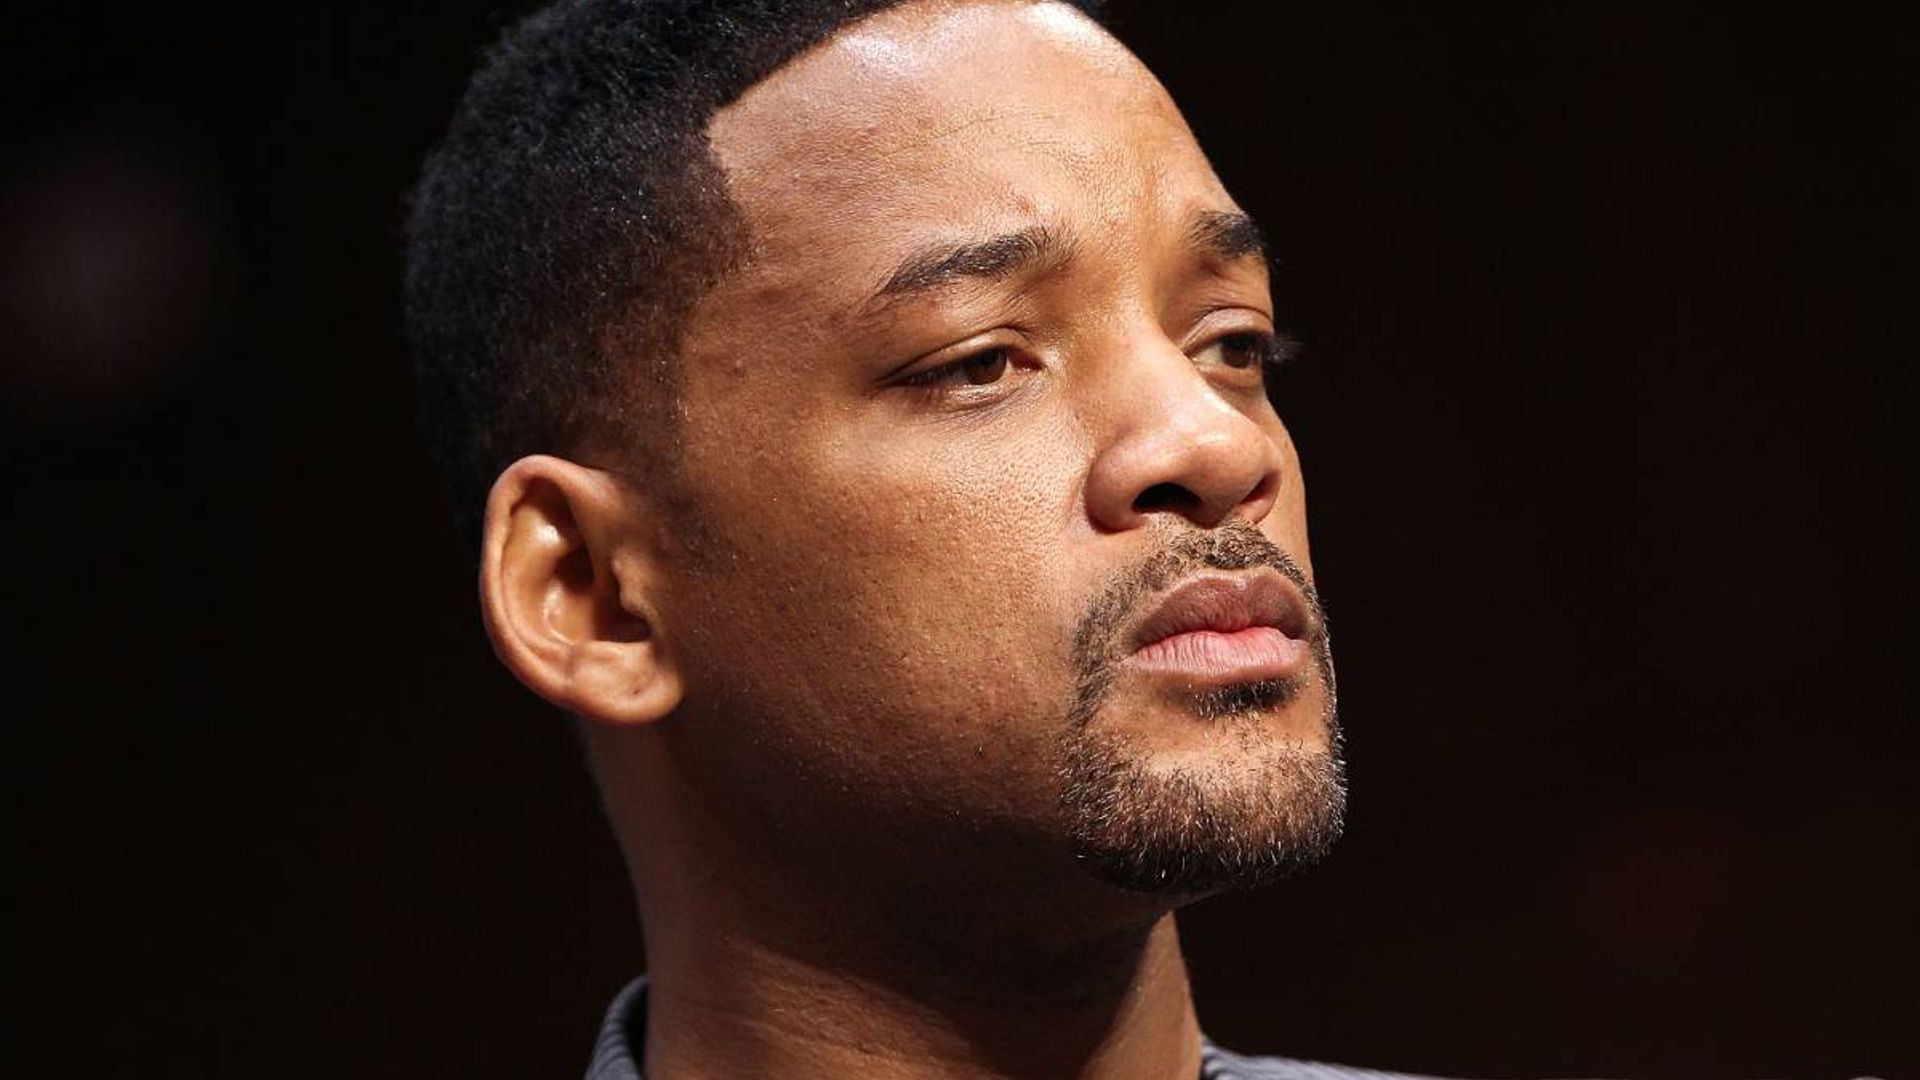 will smith health news shock before event